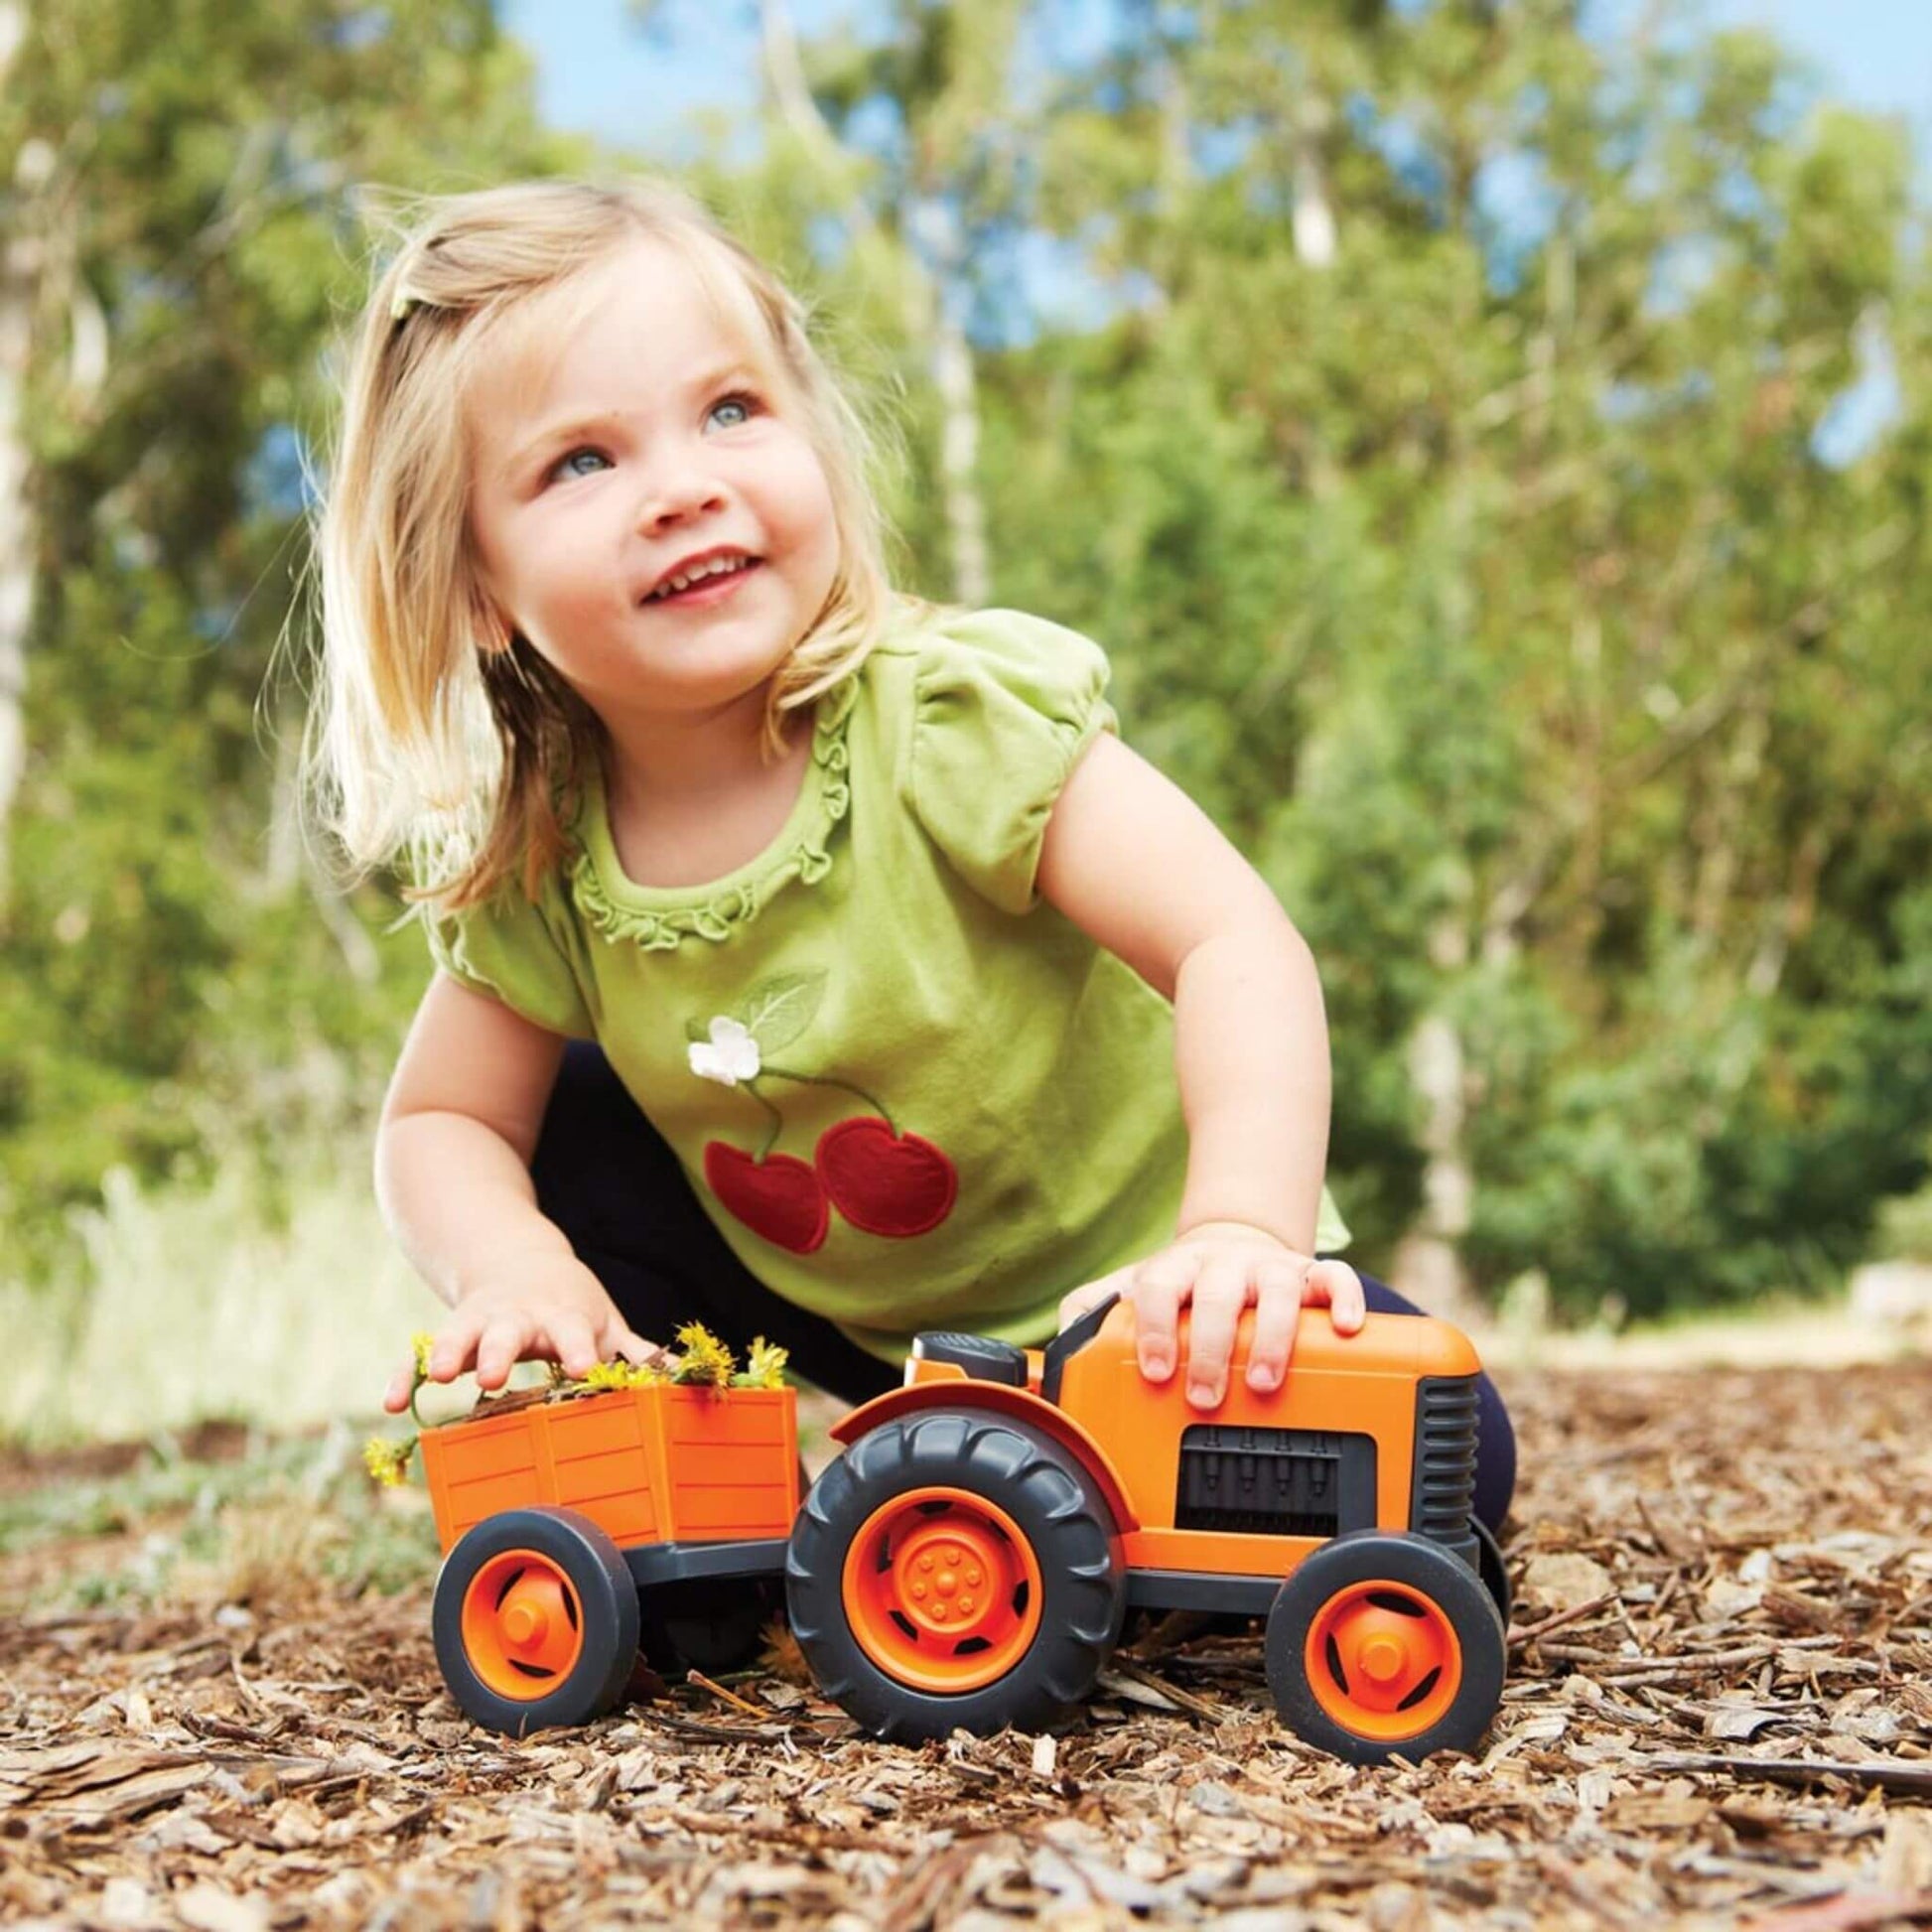 Green Toys Toy Tractor and trailer - eco toys made from recycled plastic